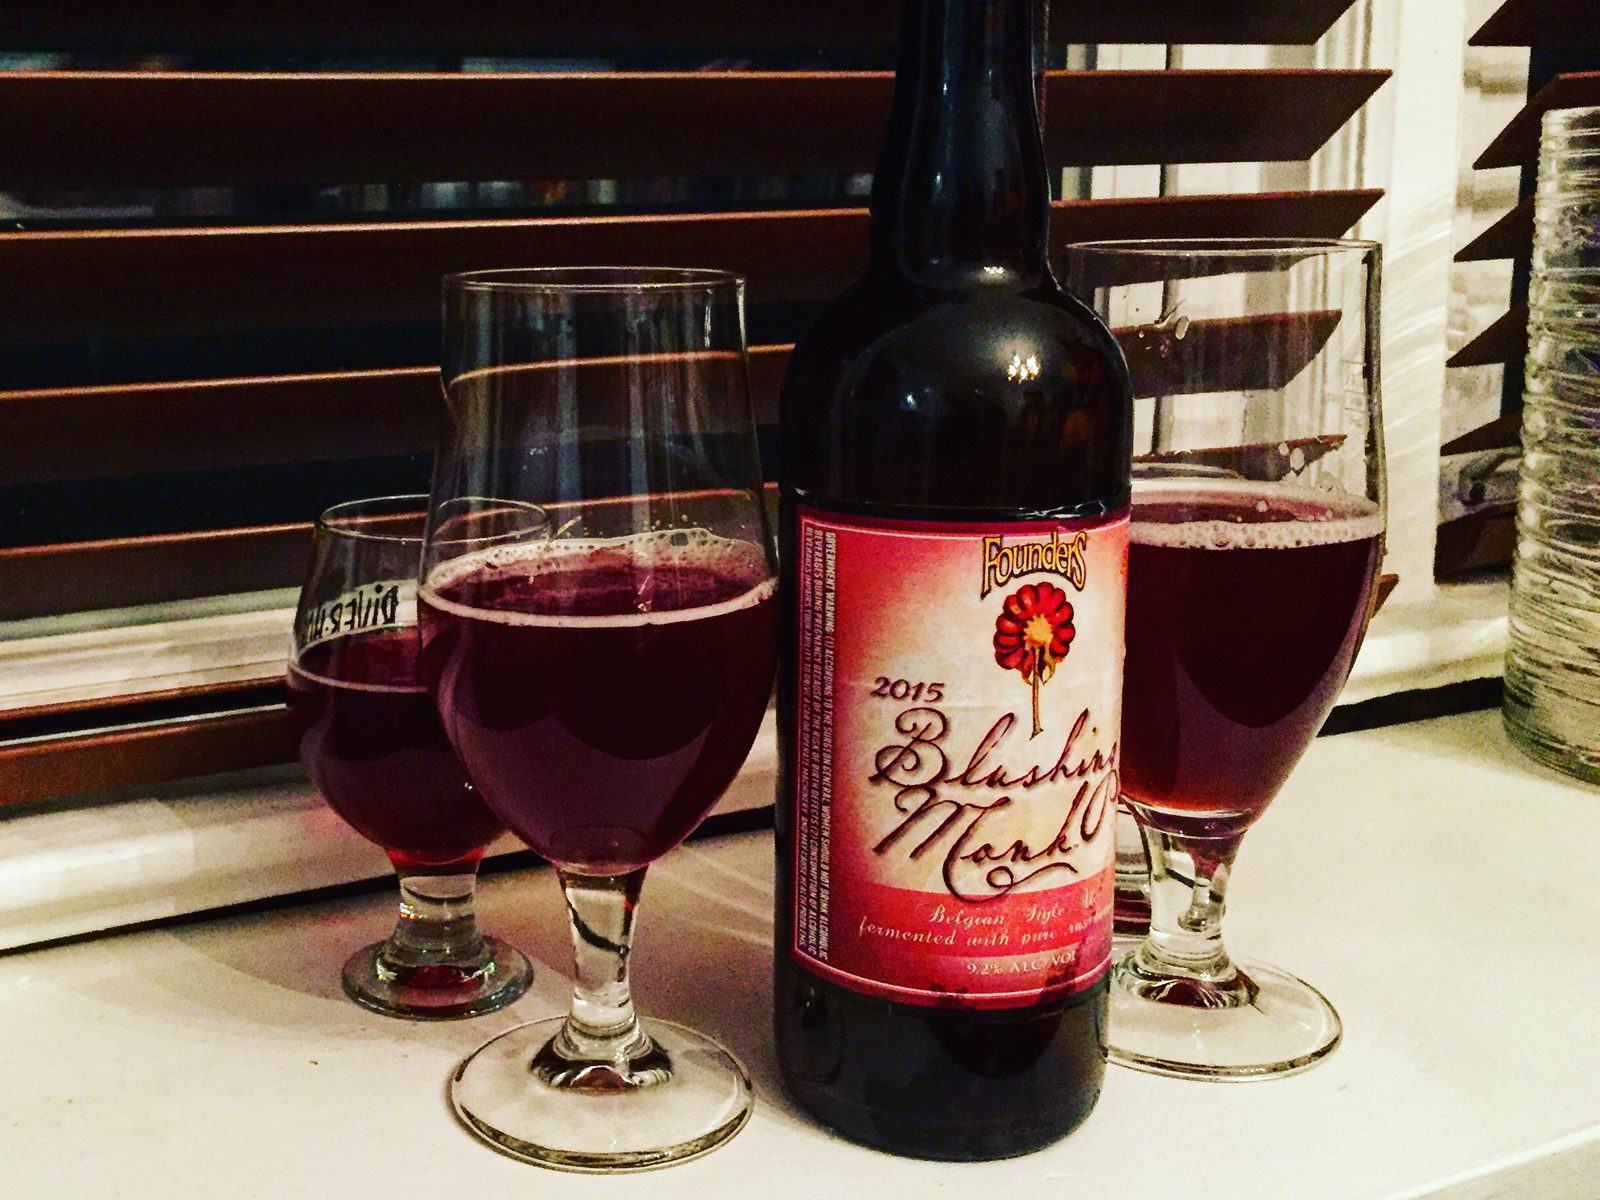 Founders Brewing Company: Blushing Monk